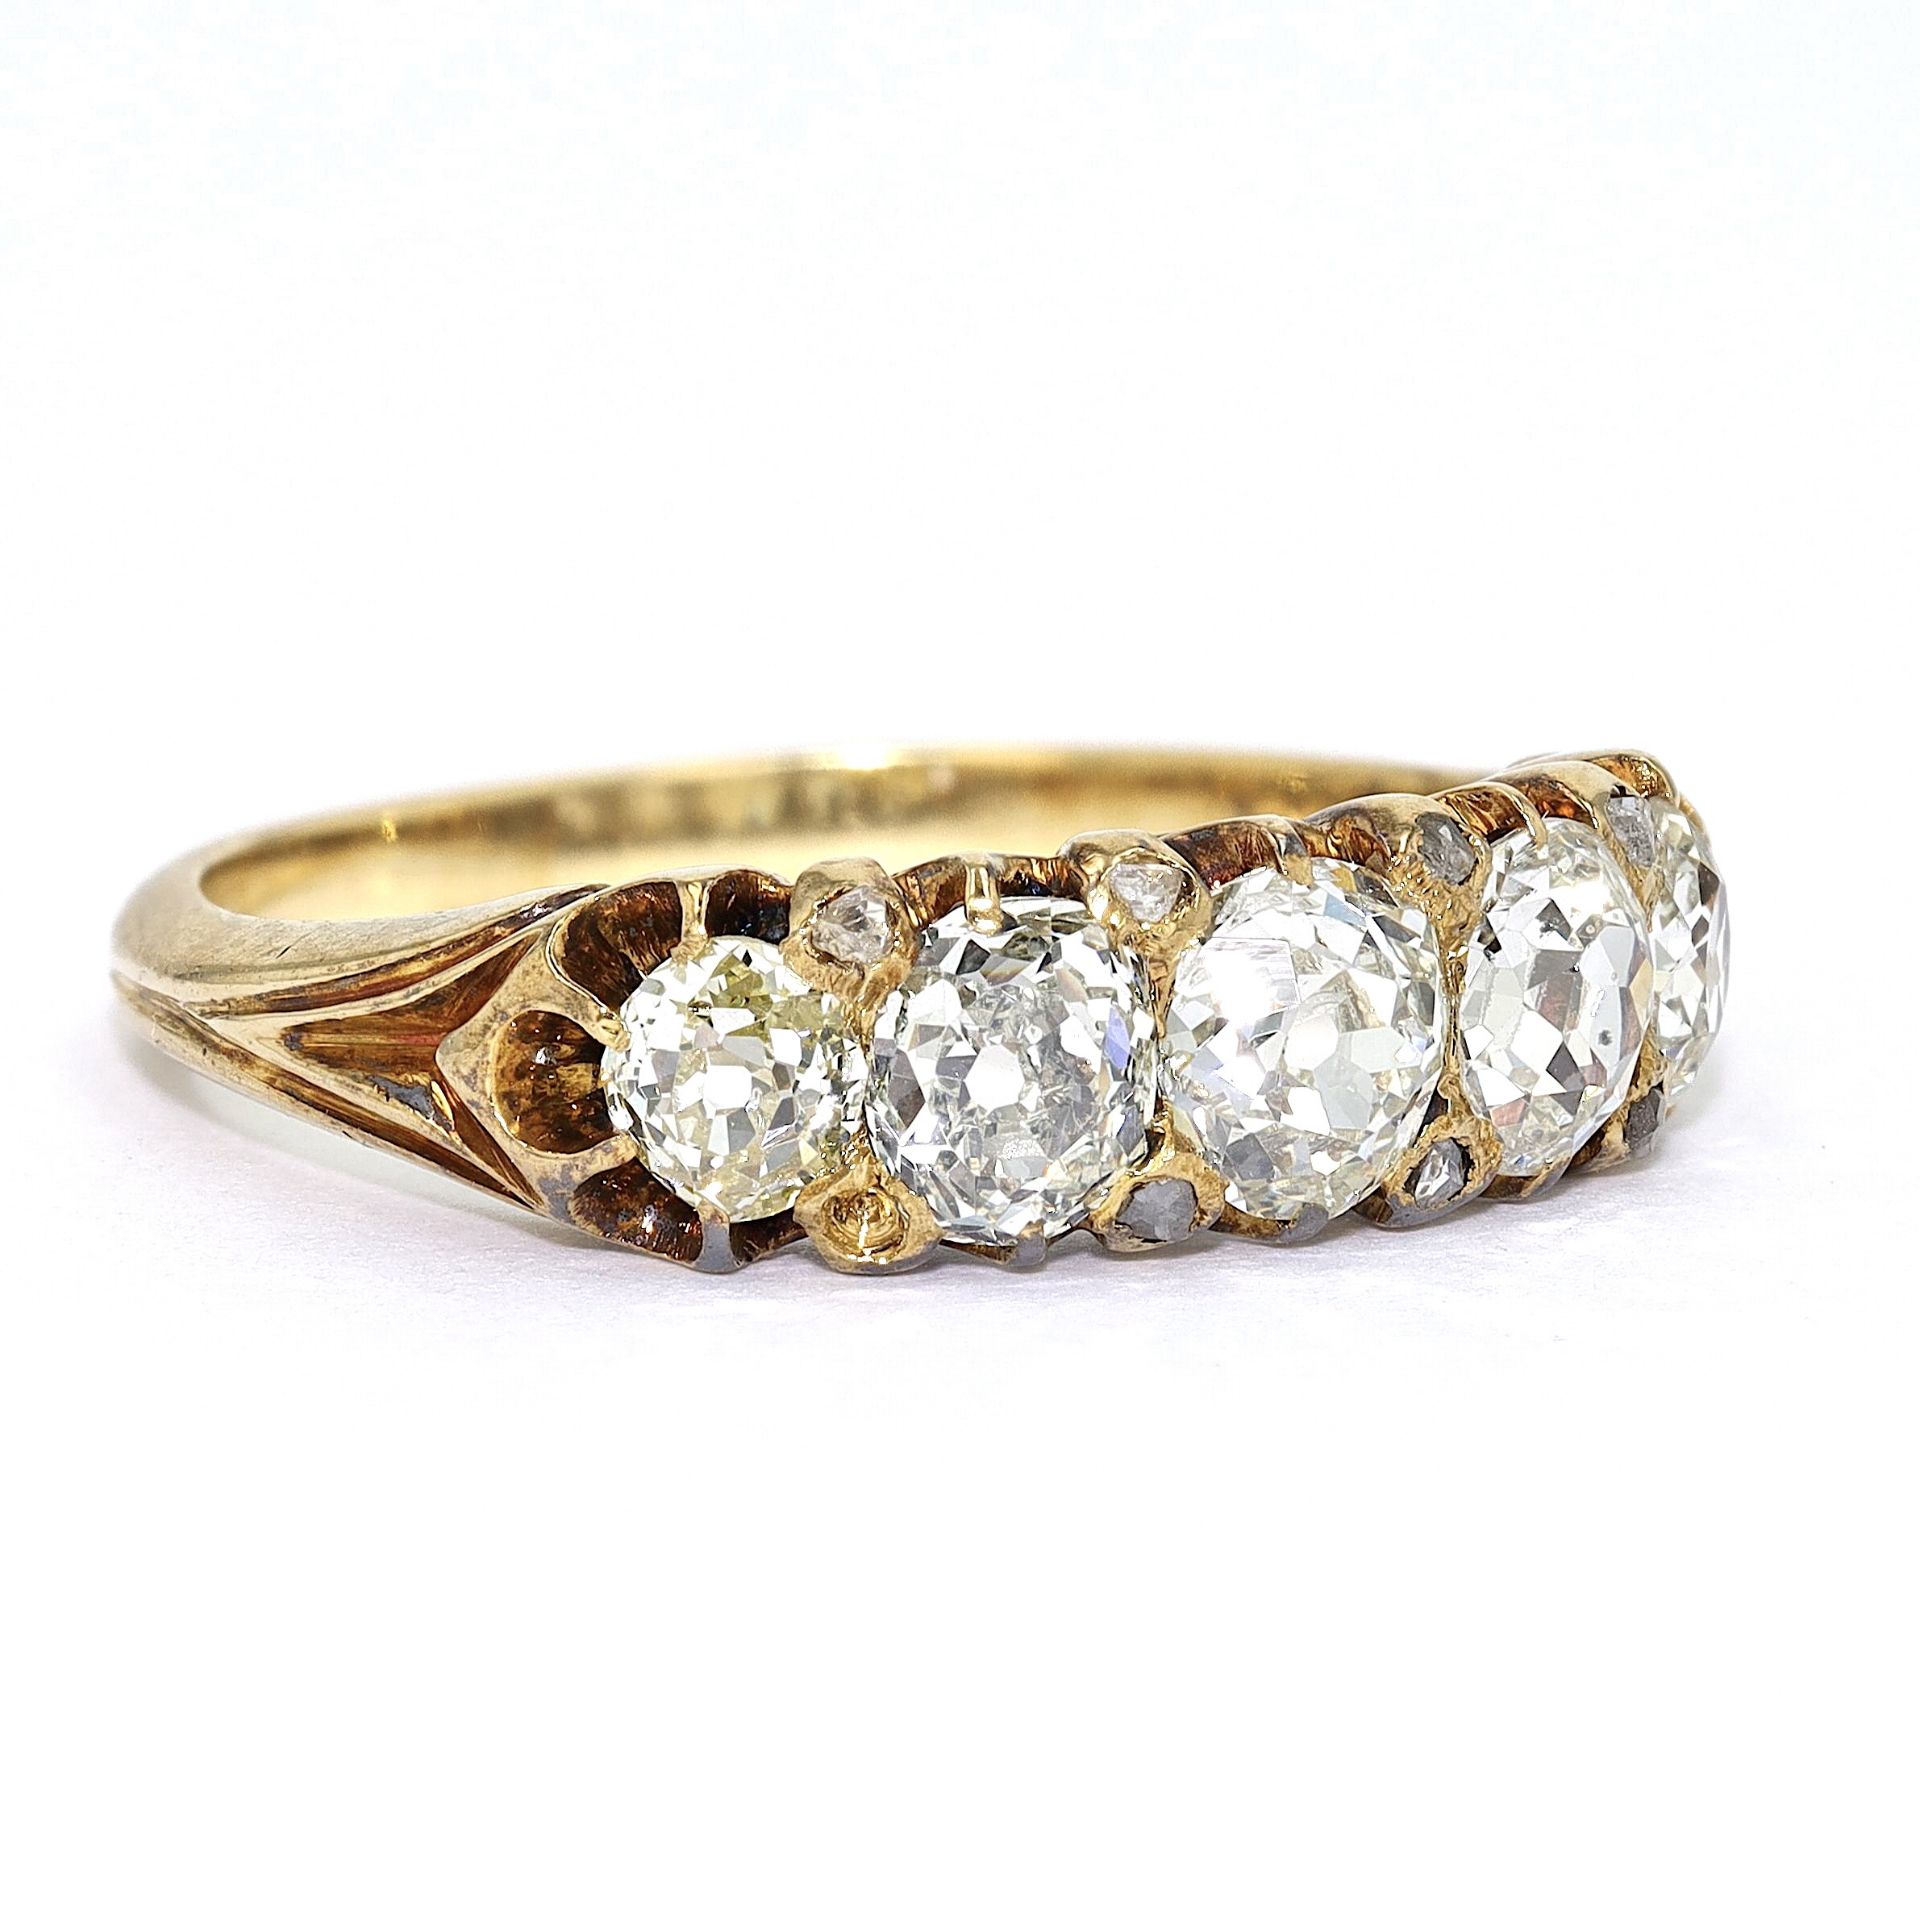 Ring ca. 750 gold with ca. 1,15 ct diamonds - Image 3 of 5